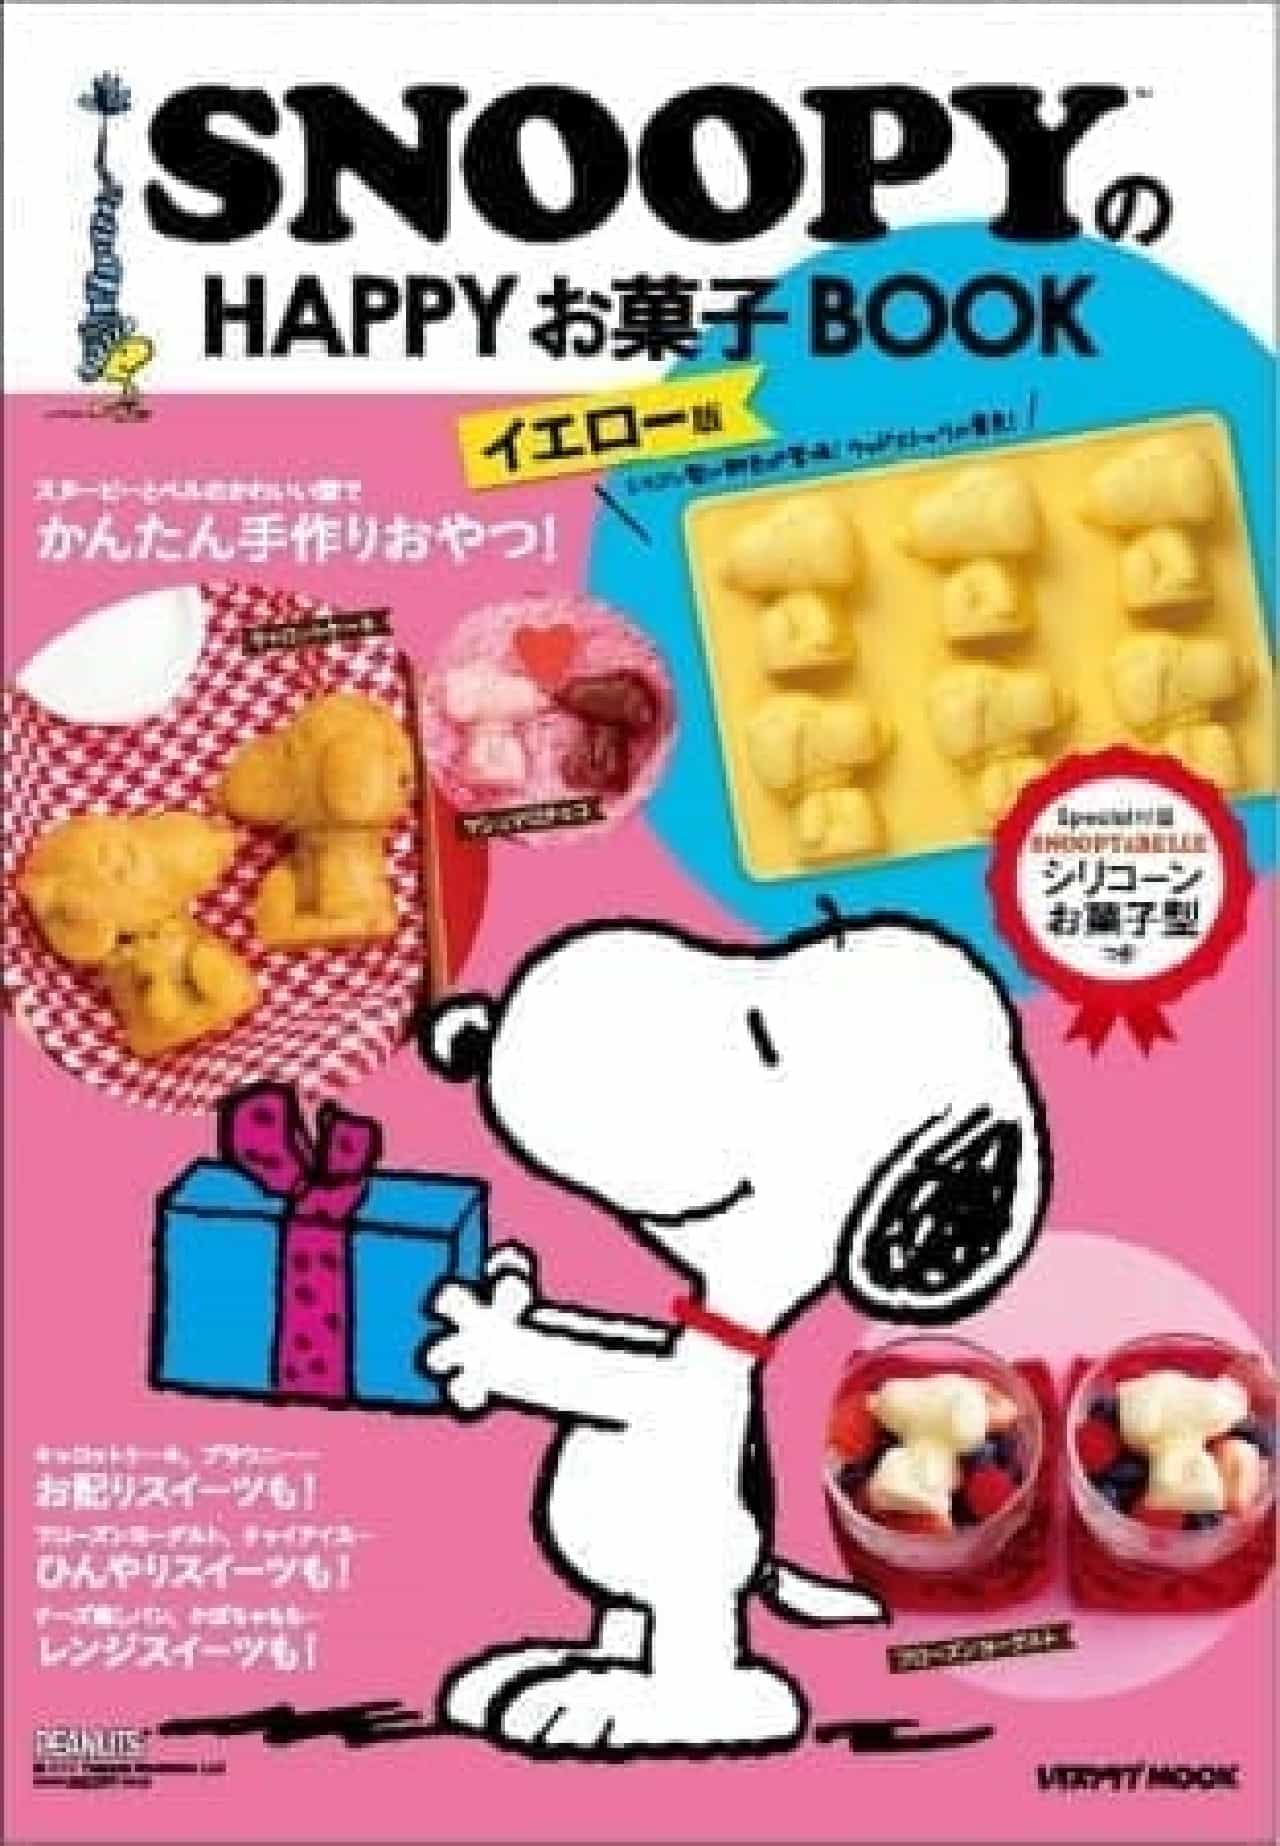 SNOOPY's HAPPY sweets BOOK yellow version